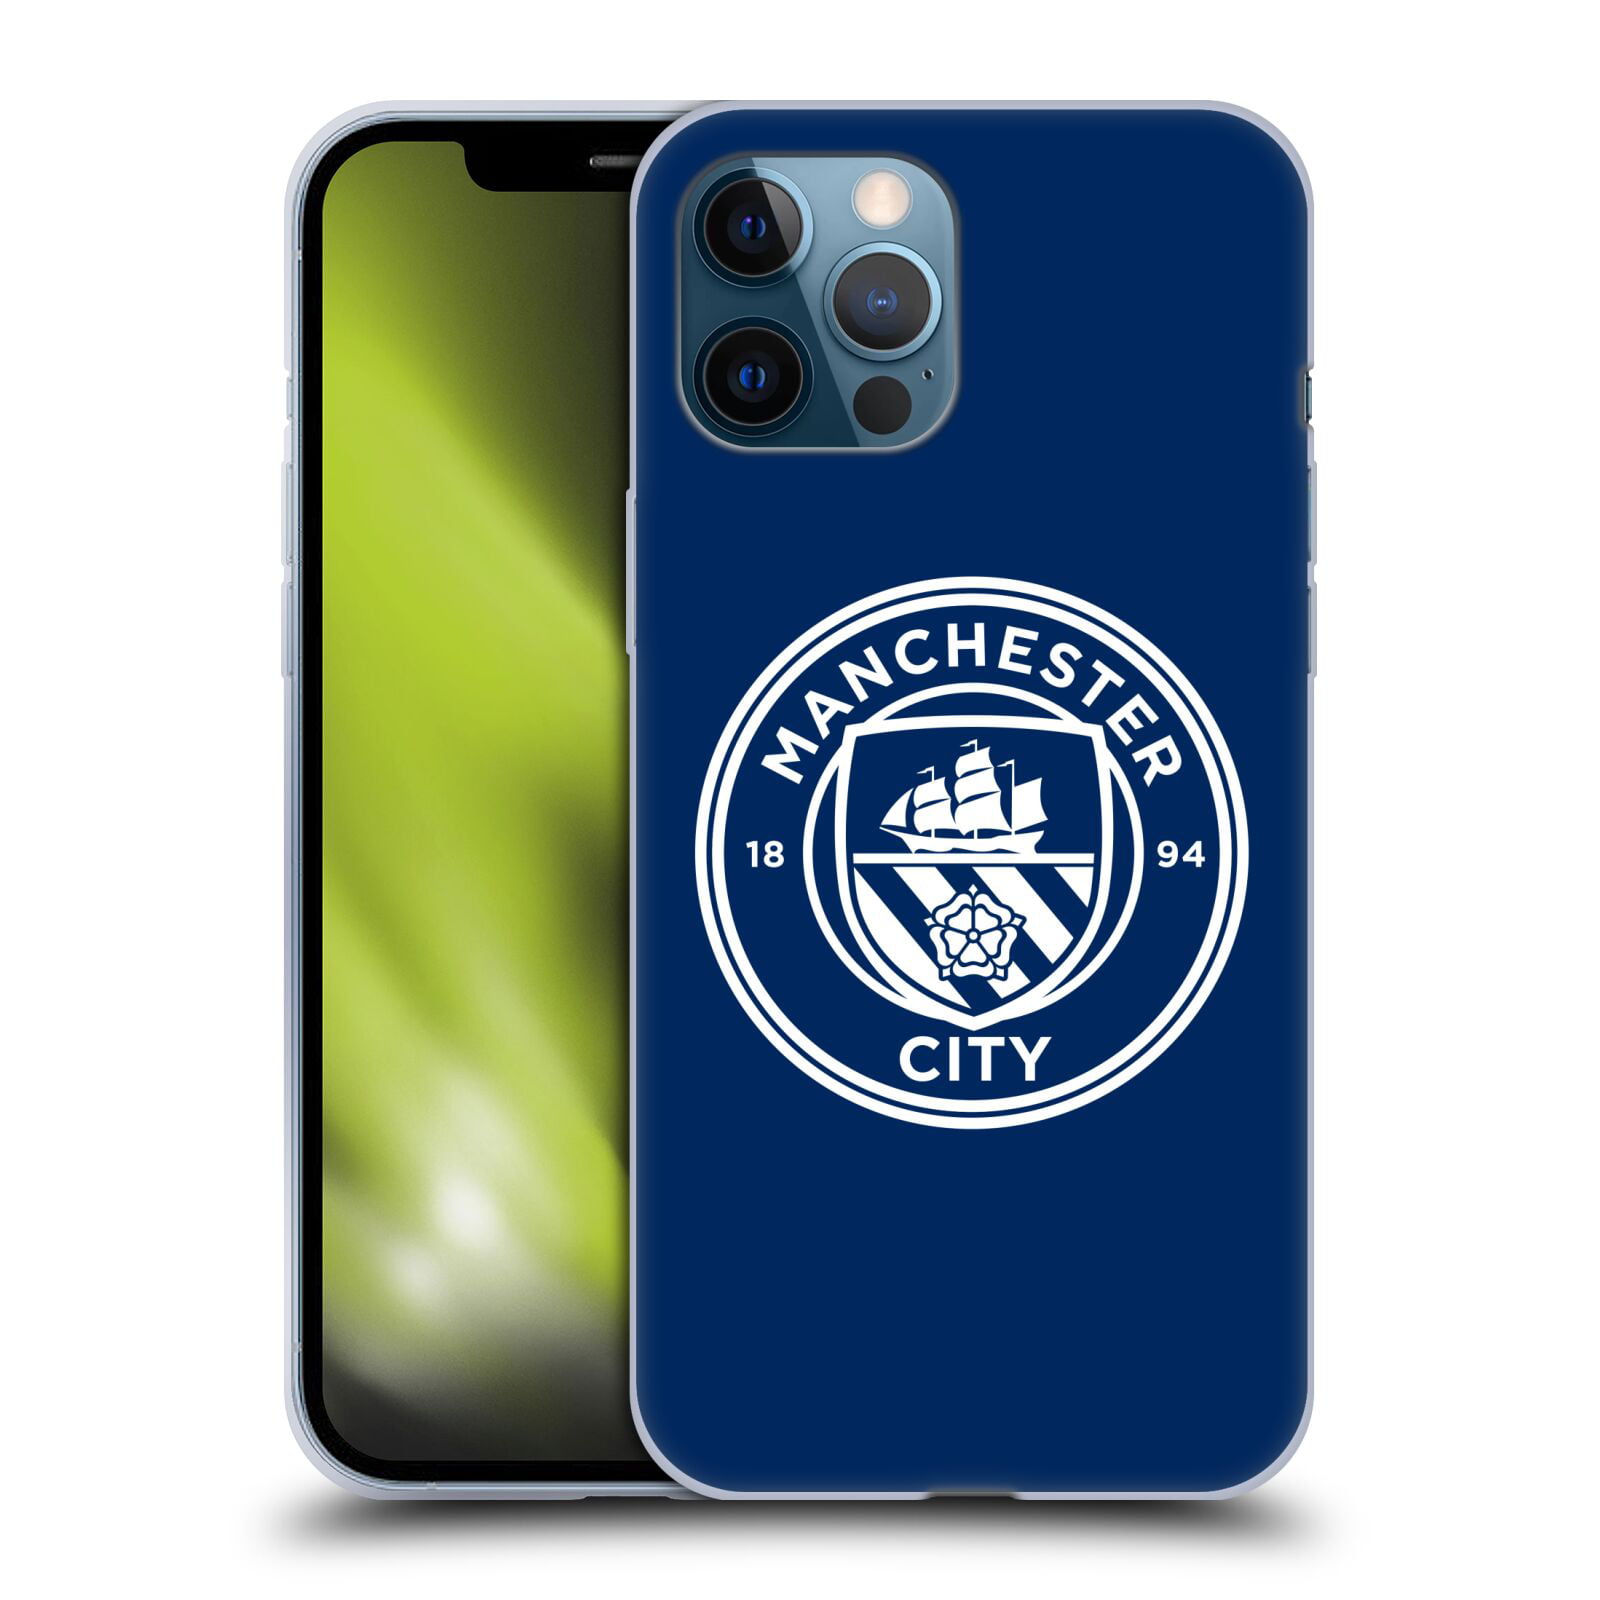 Manchester City Football Club iPhone 7 iPhone 8 Shock Proof TPU Case Cover 